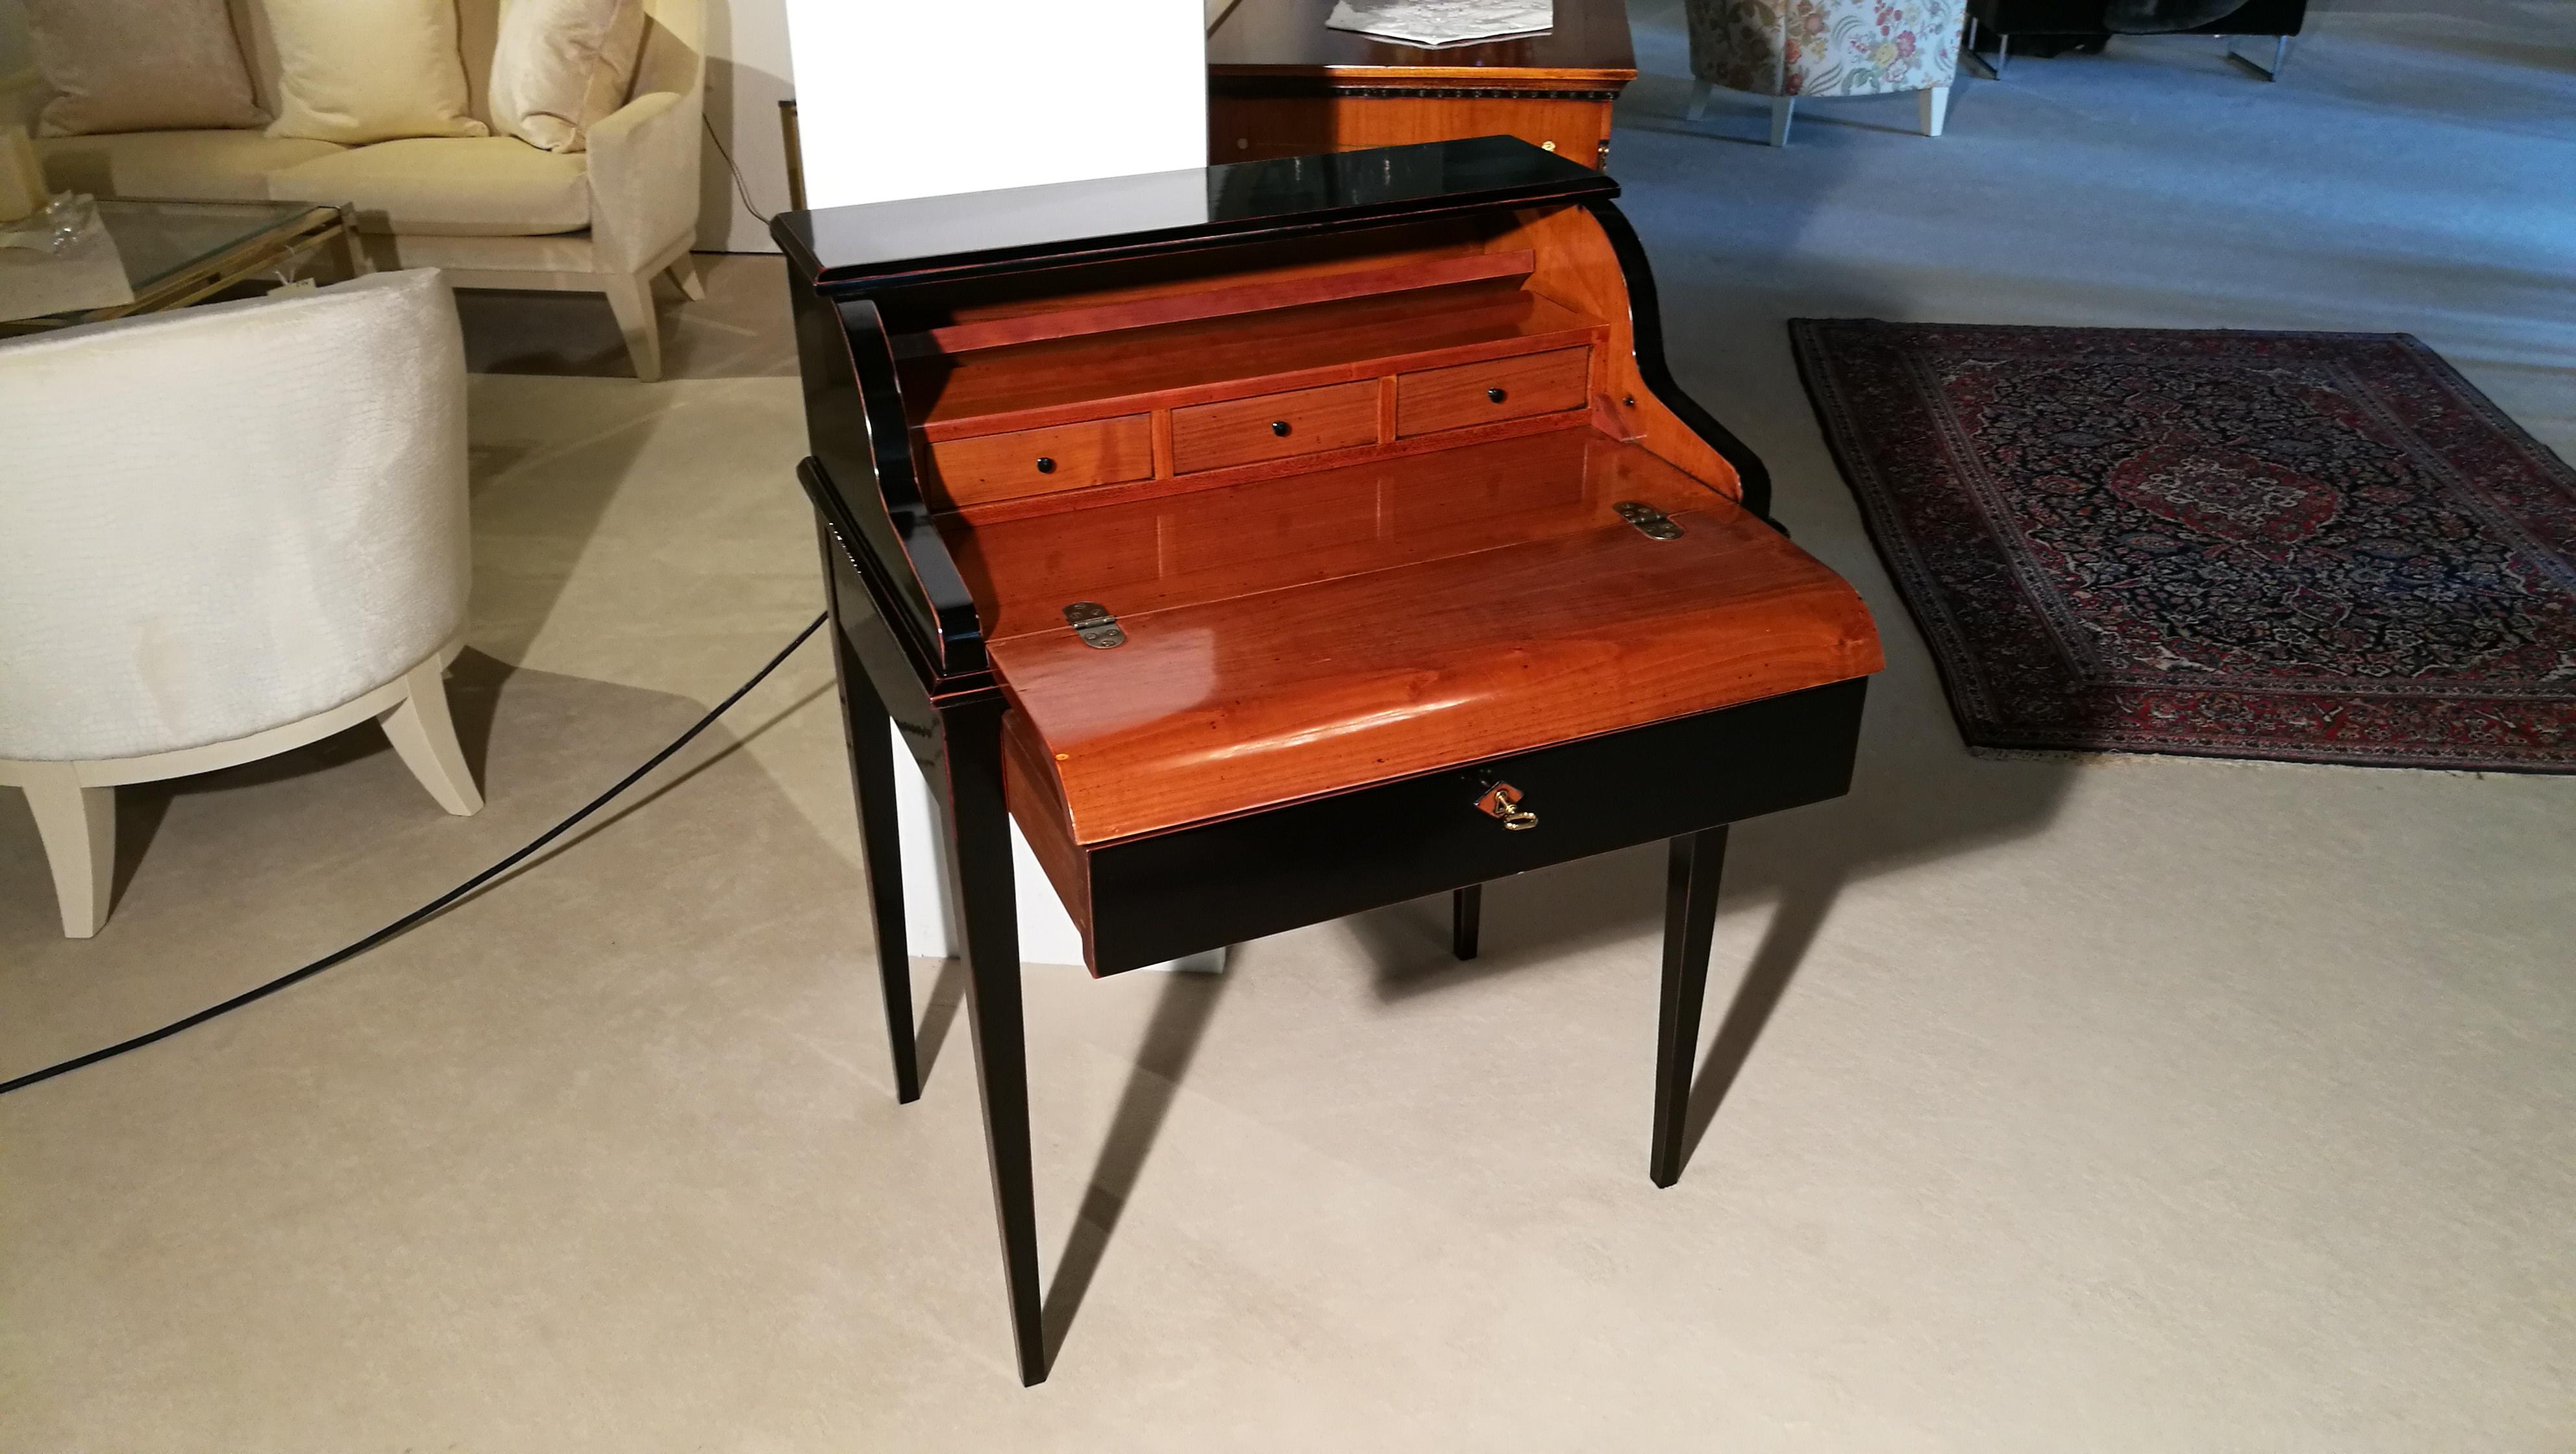 Here you have an outstanding secretary in the style of Biedermeier. It was handmade of cherrywood in Germany. With many details and much complex work. The below drawer opens automatically, when you open the cover. The exterior is finished with high